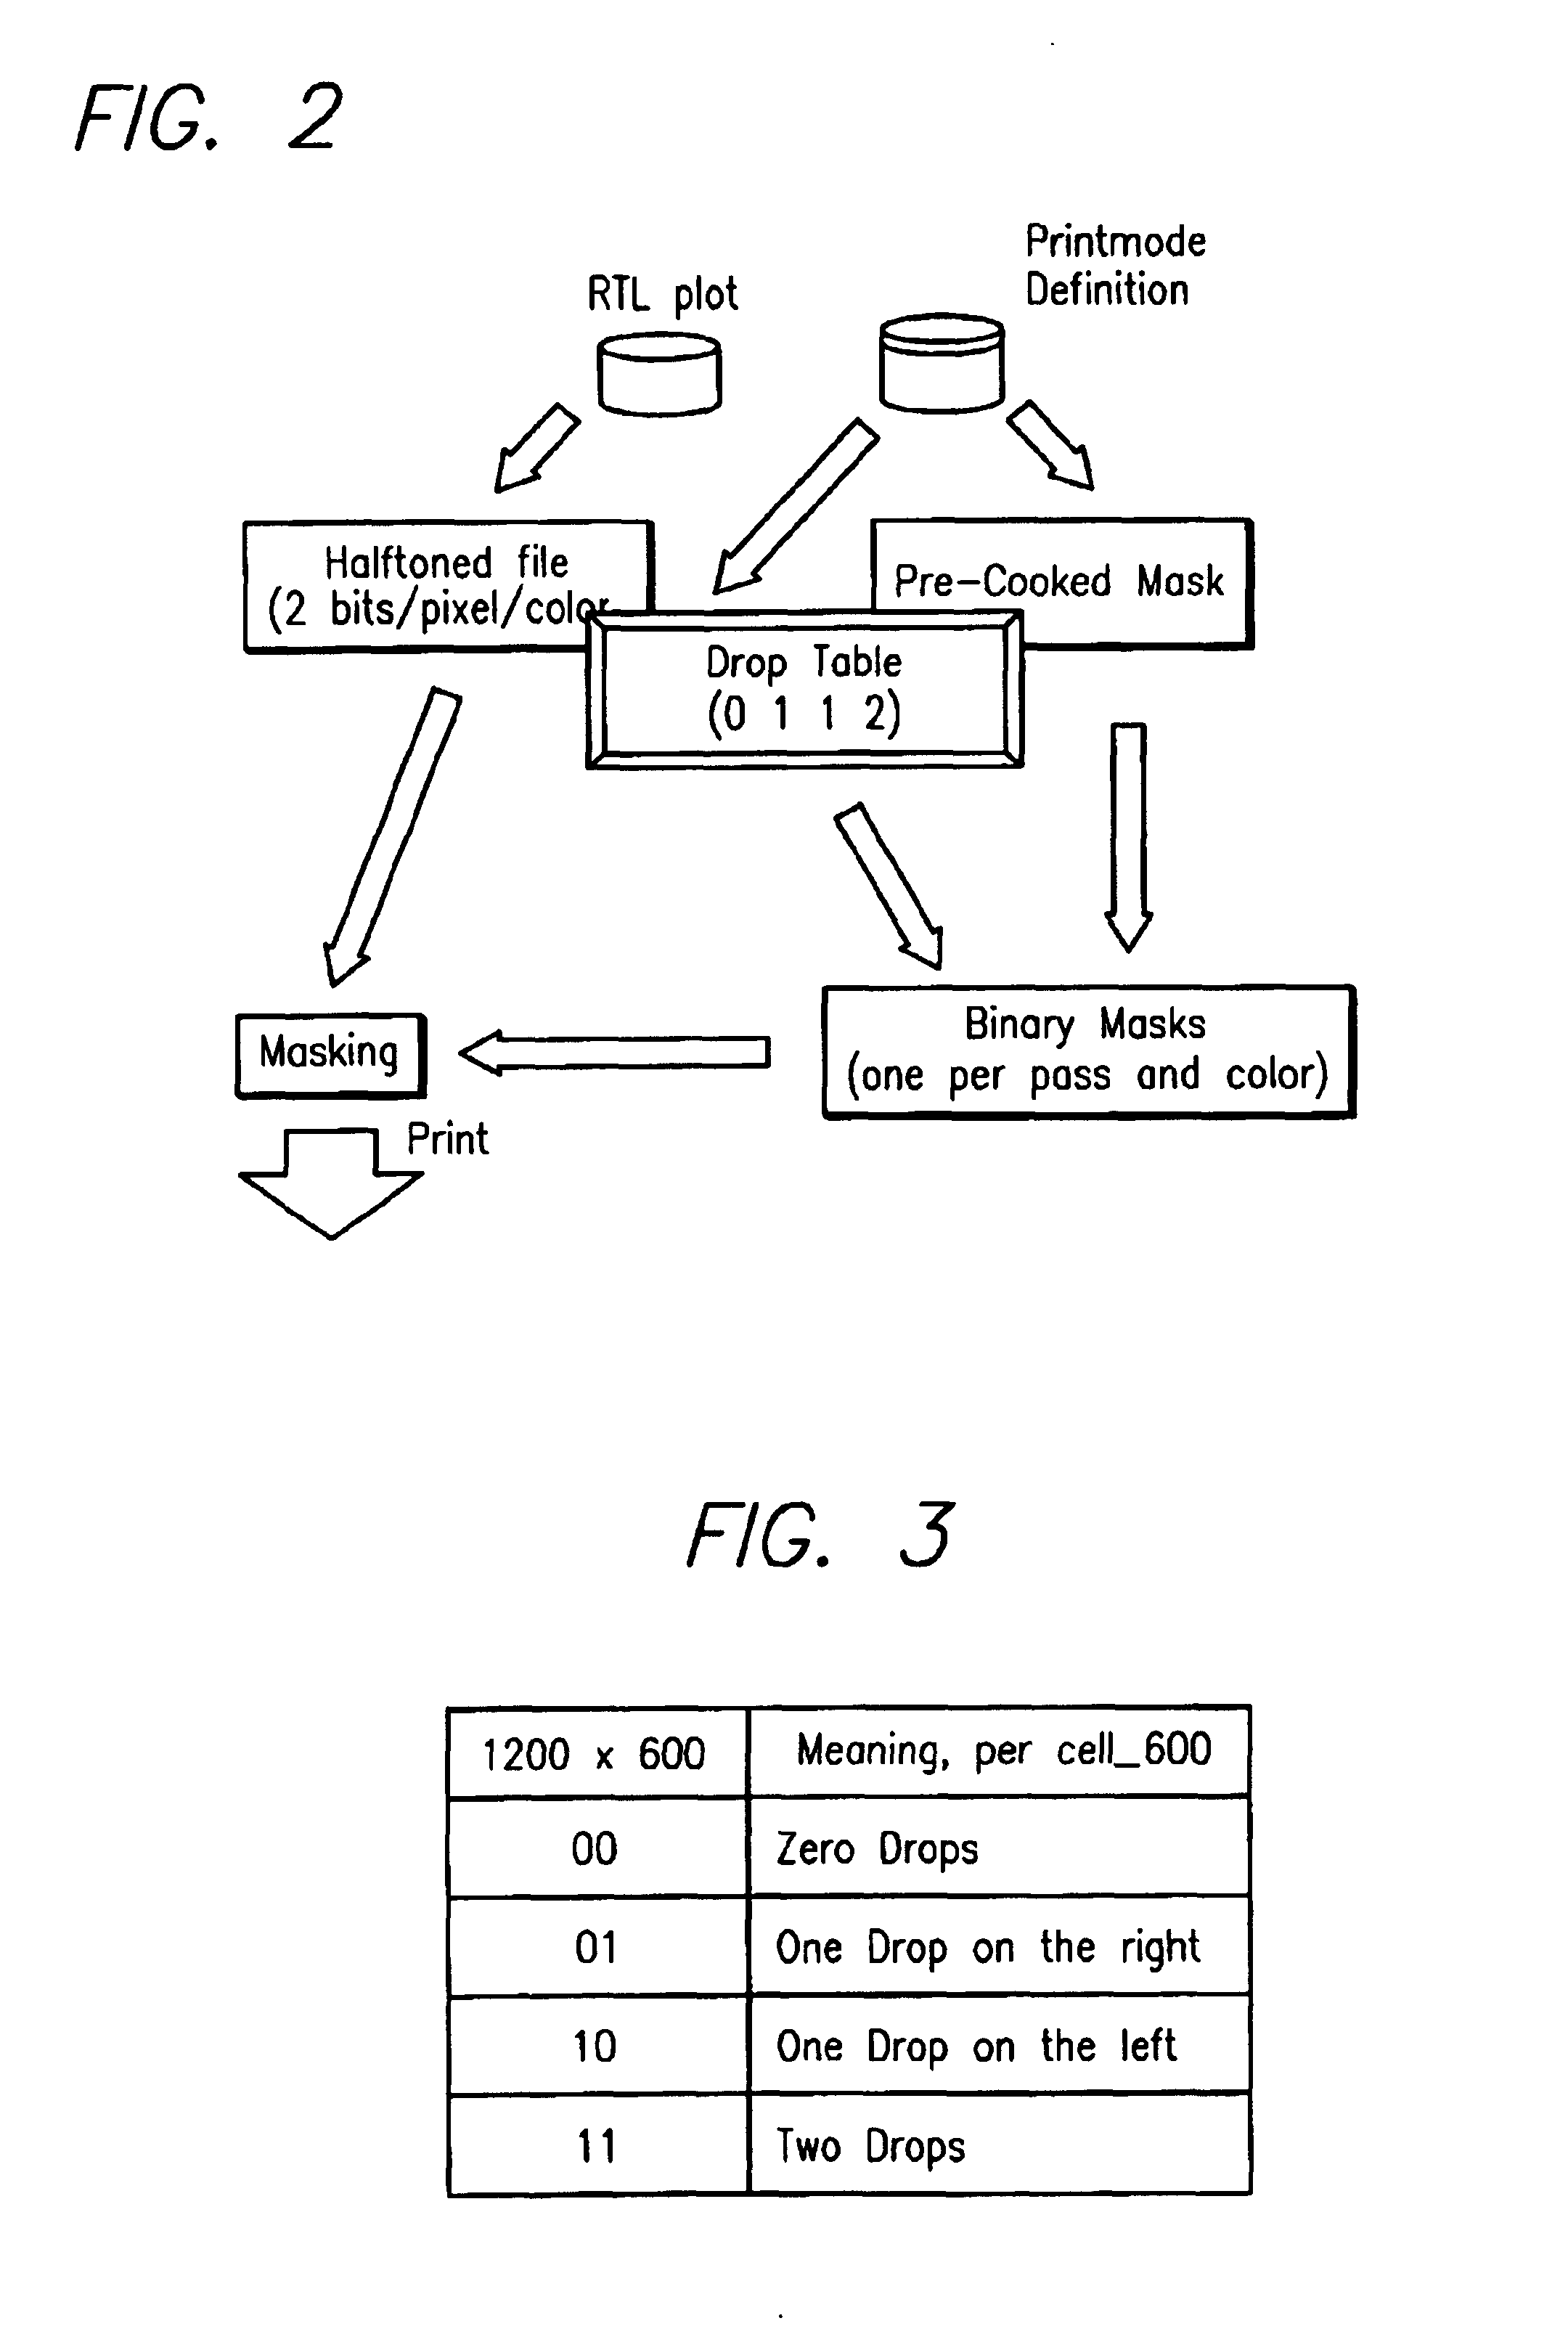 Externally customized tonal-hierarchy configuration and complementary business arrangements, for inkjet printing